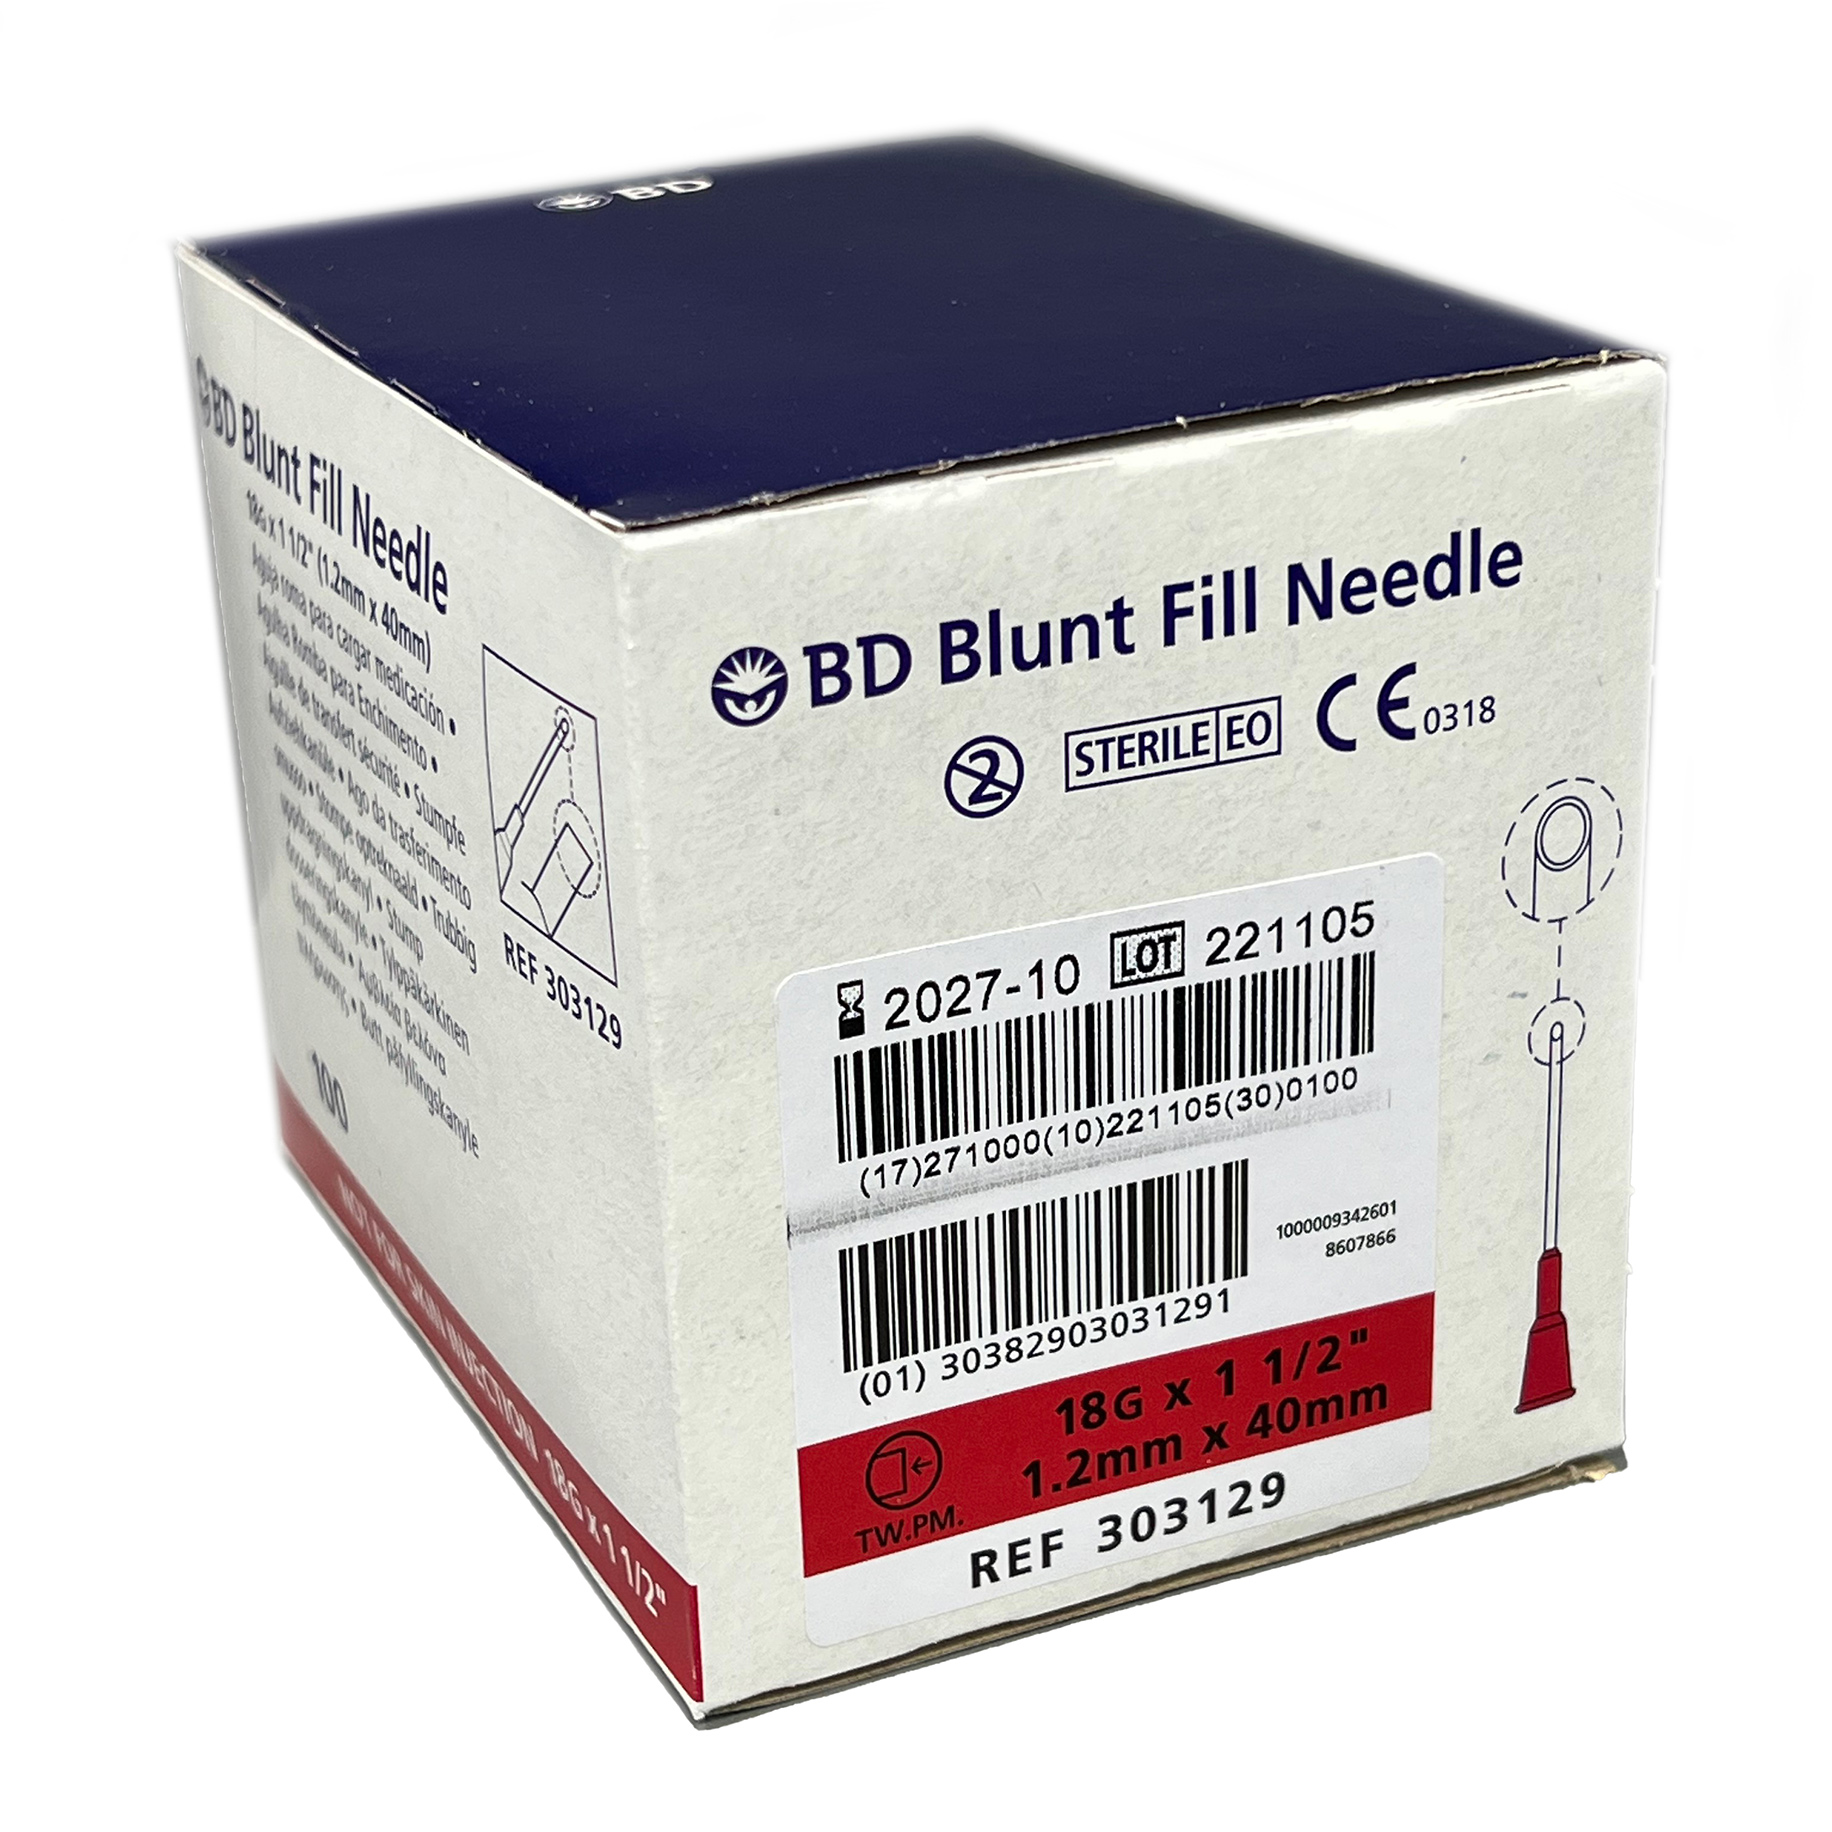 BD Blunt Fill Needle 18G x 1.5" (40mm) Red 